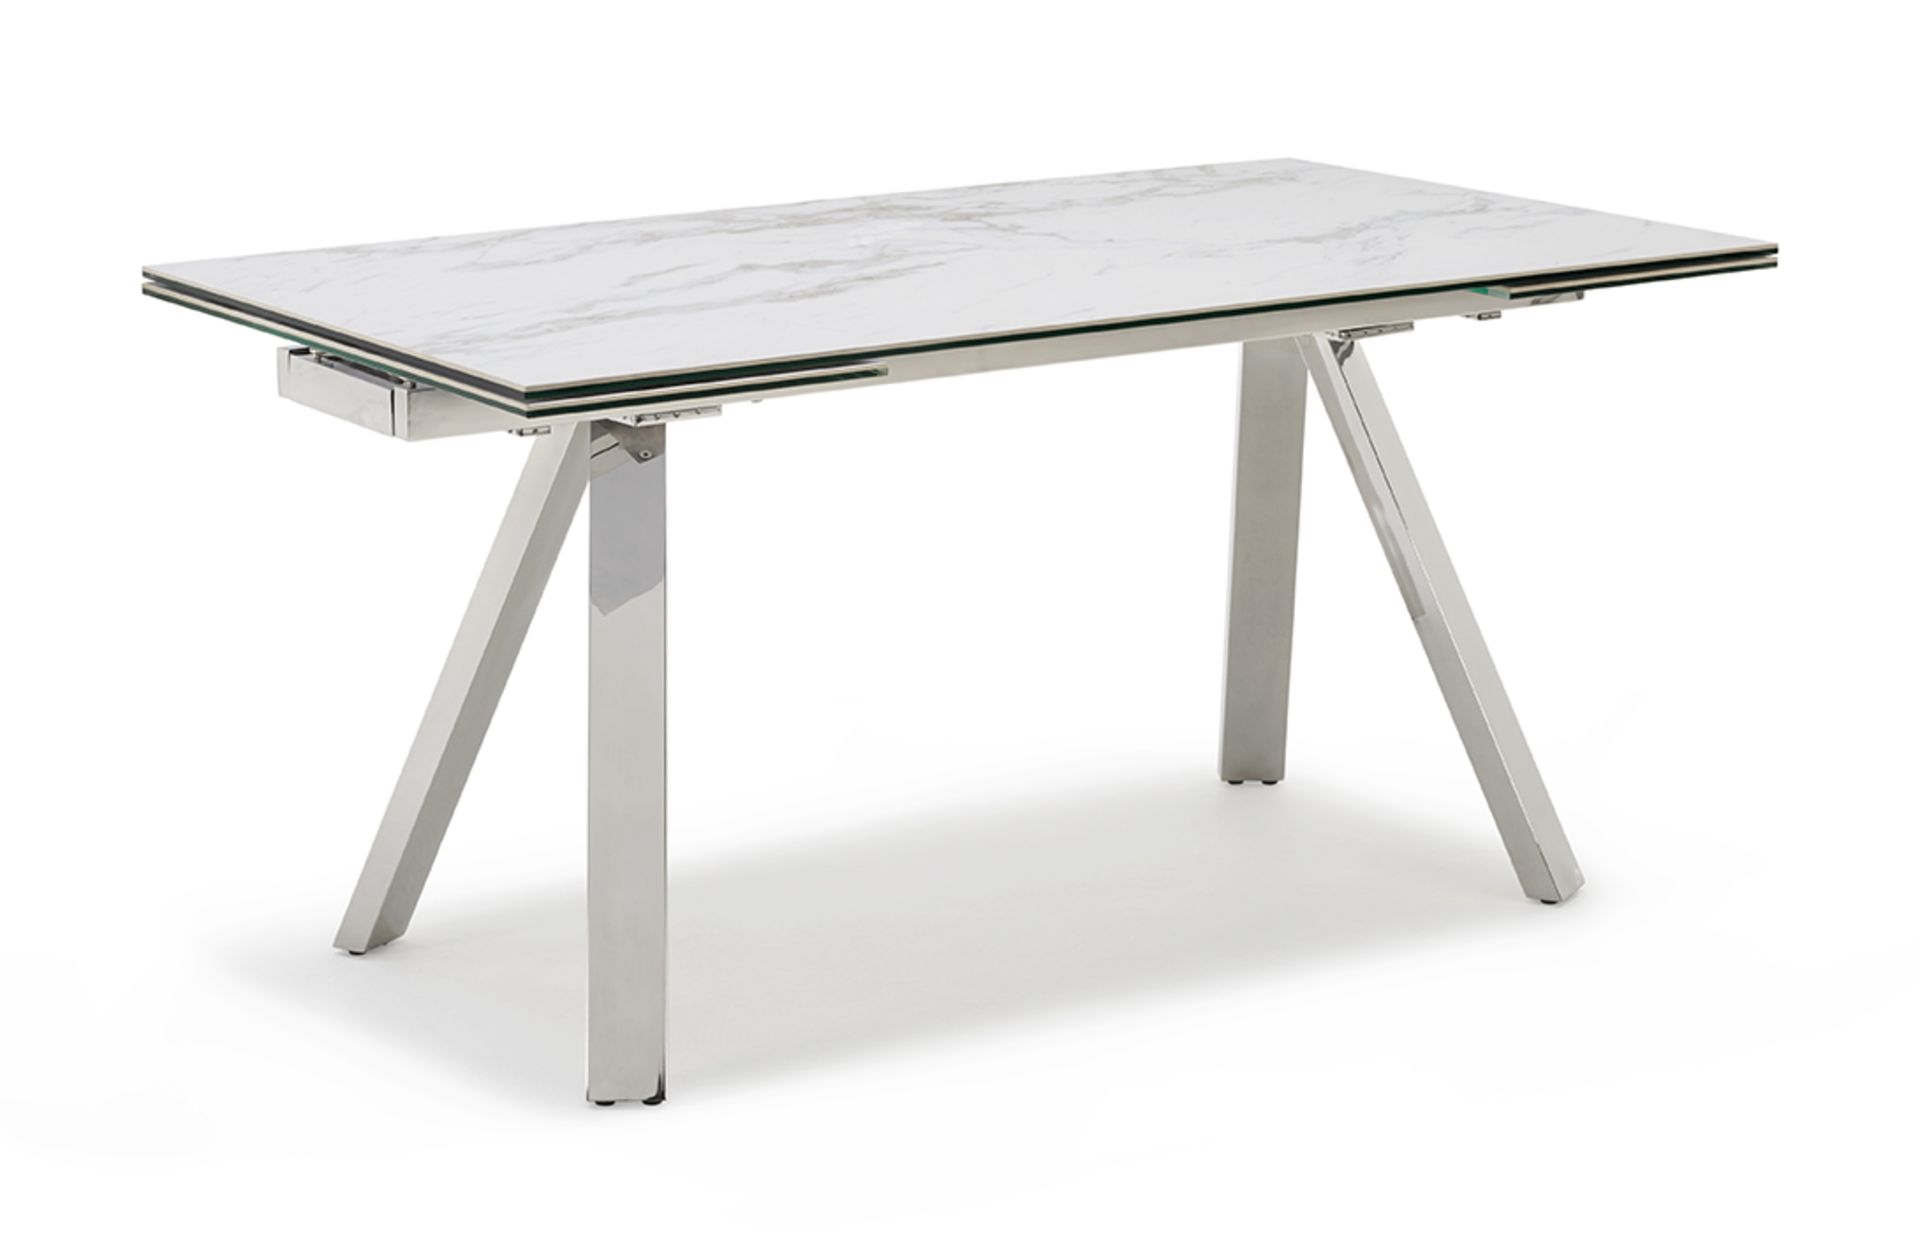 Stromboli Dining Table by Kesterport This glamorous contemporary dining table will add sensational - Image 11 of 13